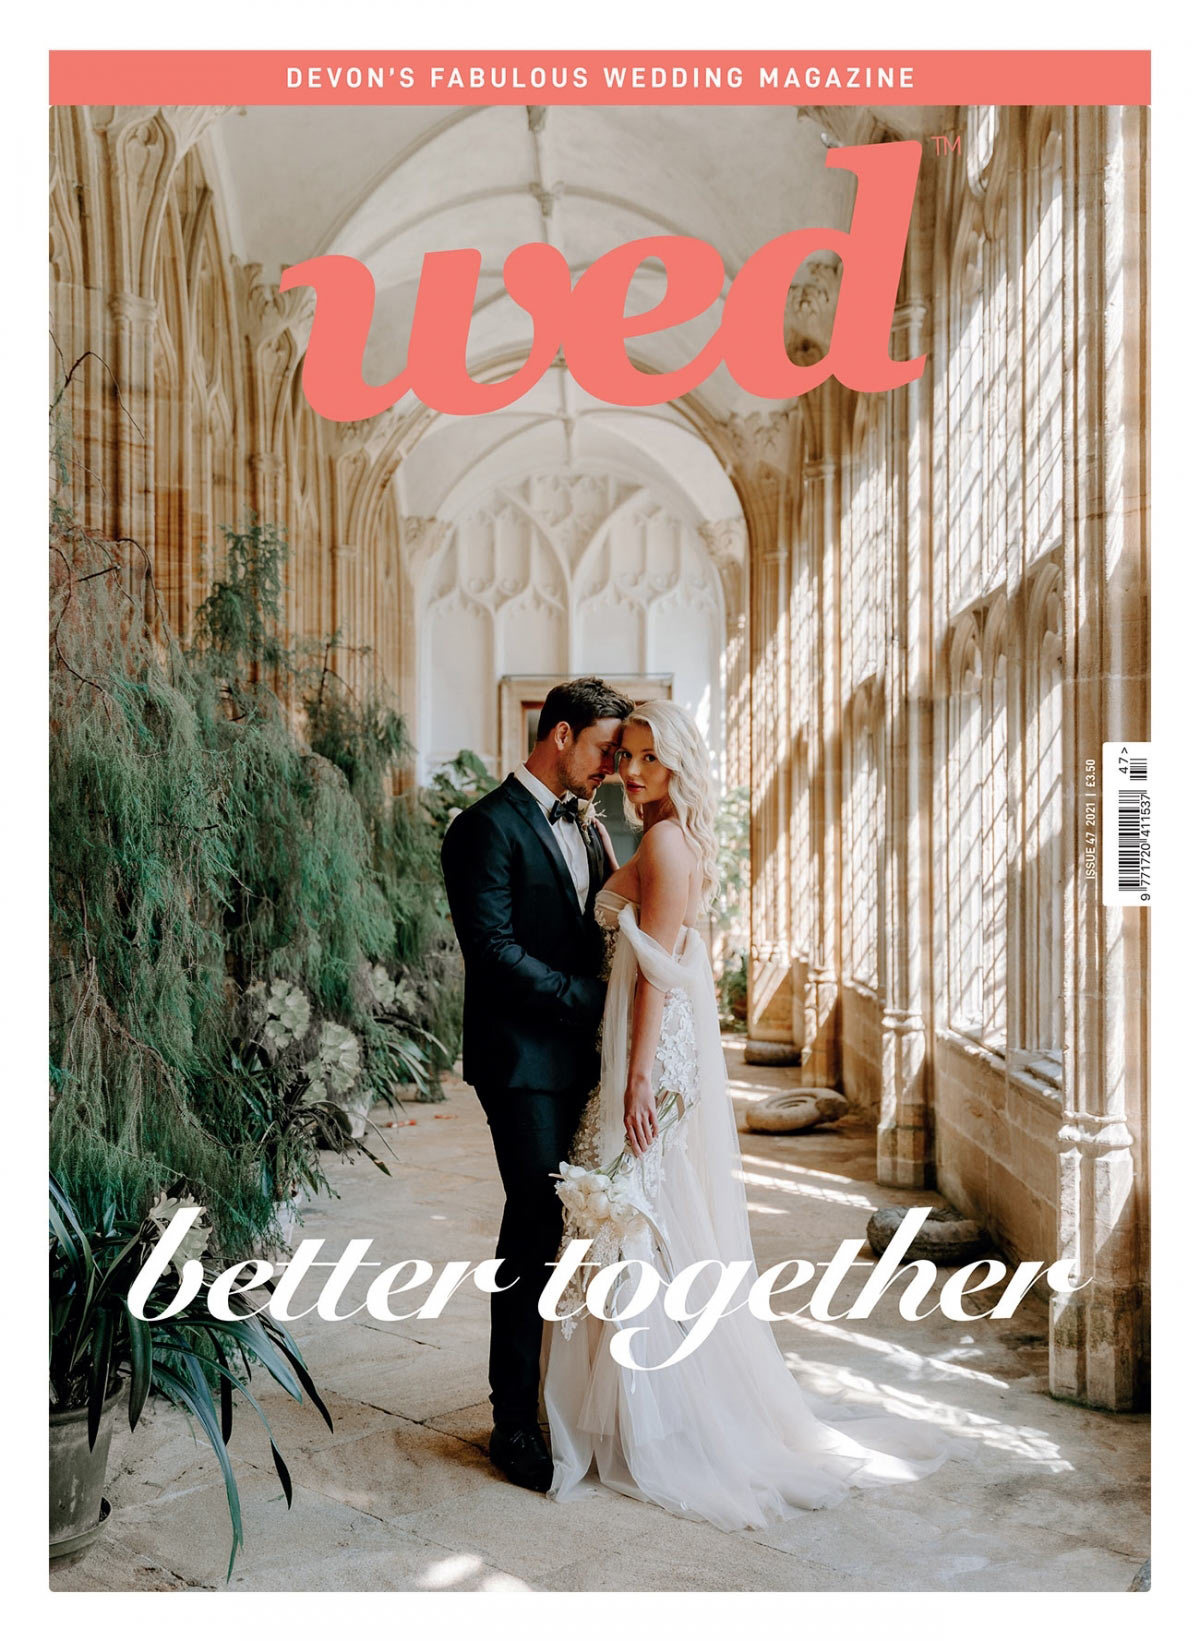 Introducing the new Devon issue of Wed Magazine!